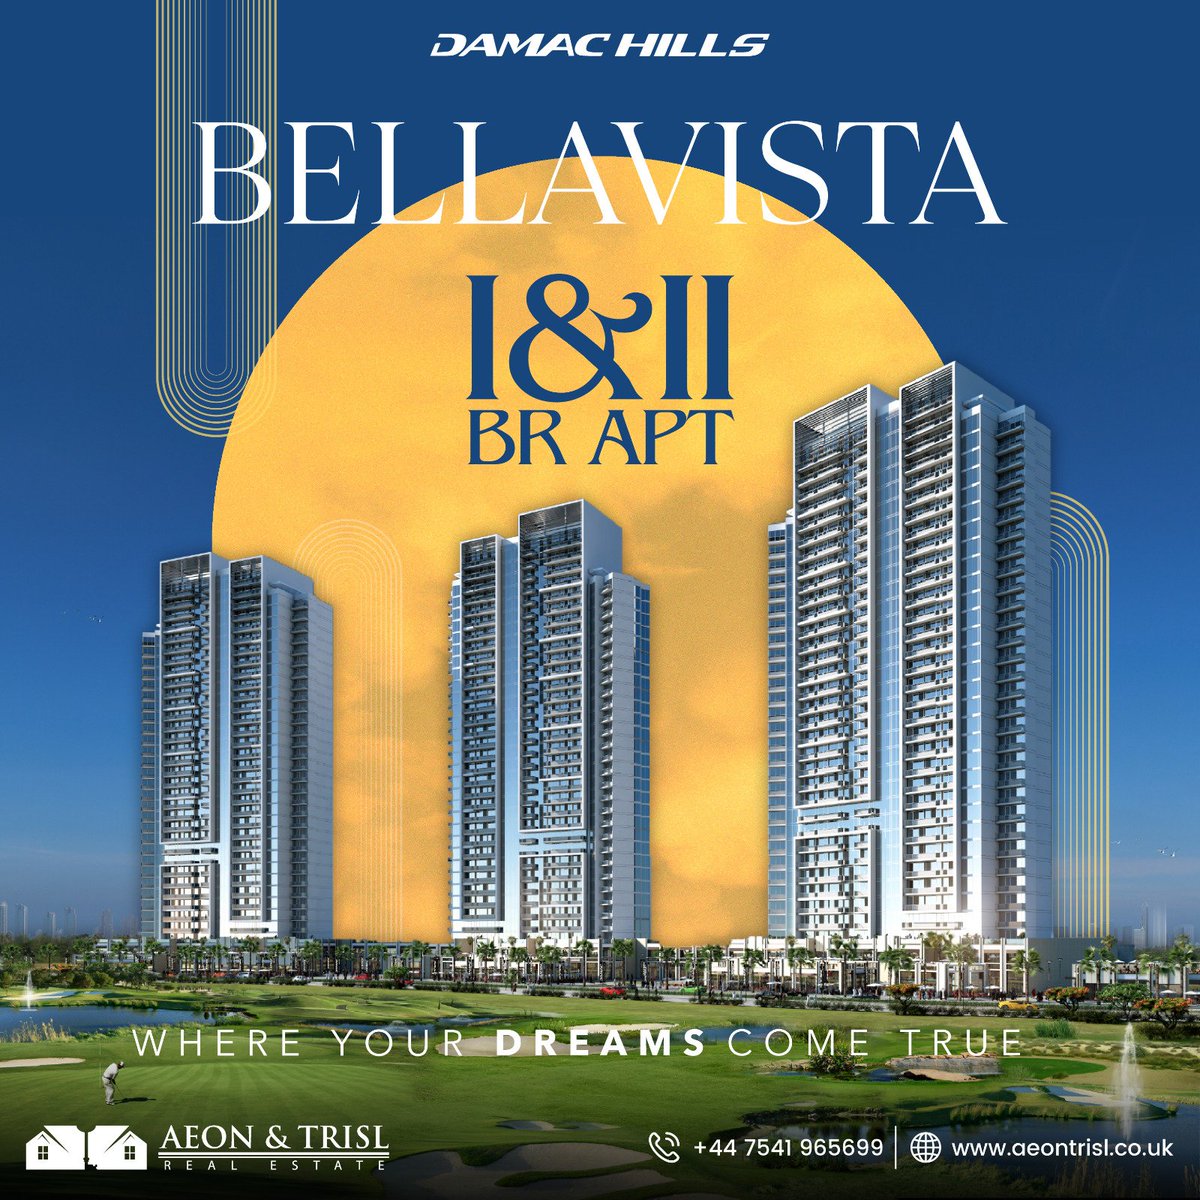 Bella Vista At Damac Hills!

'Indulge in unparalleled comfort and relaxation at Bella Vista in Damac Hills, where our spacious 1 & 2 Bedroom Apartments offer stunning interiors and panoramic views.'

Register Your Interest NOW
📱 0044 203 727 5518 / 0044 7949 233 817